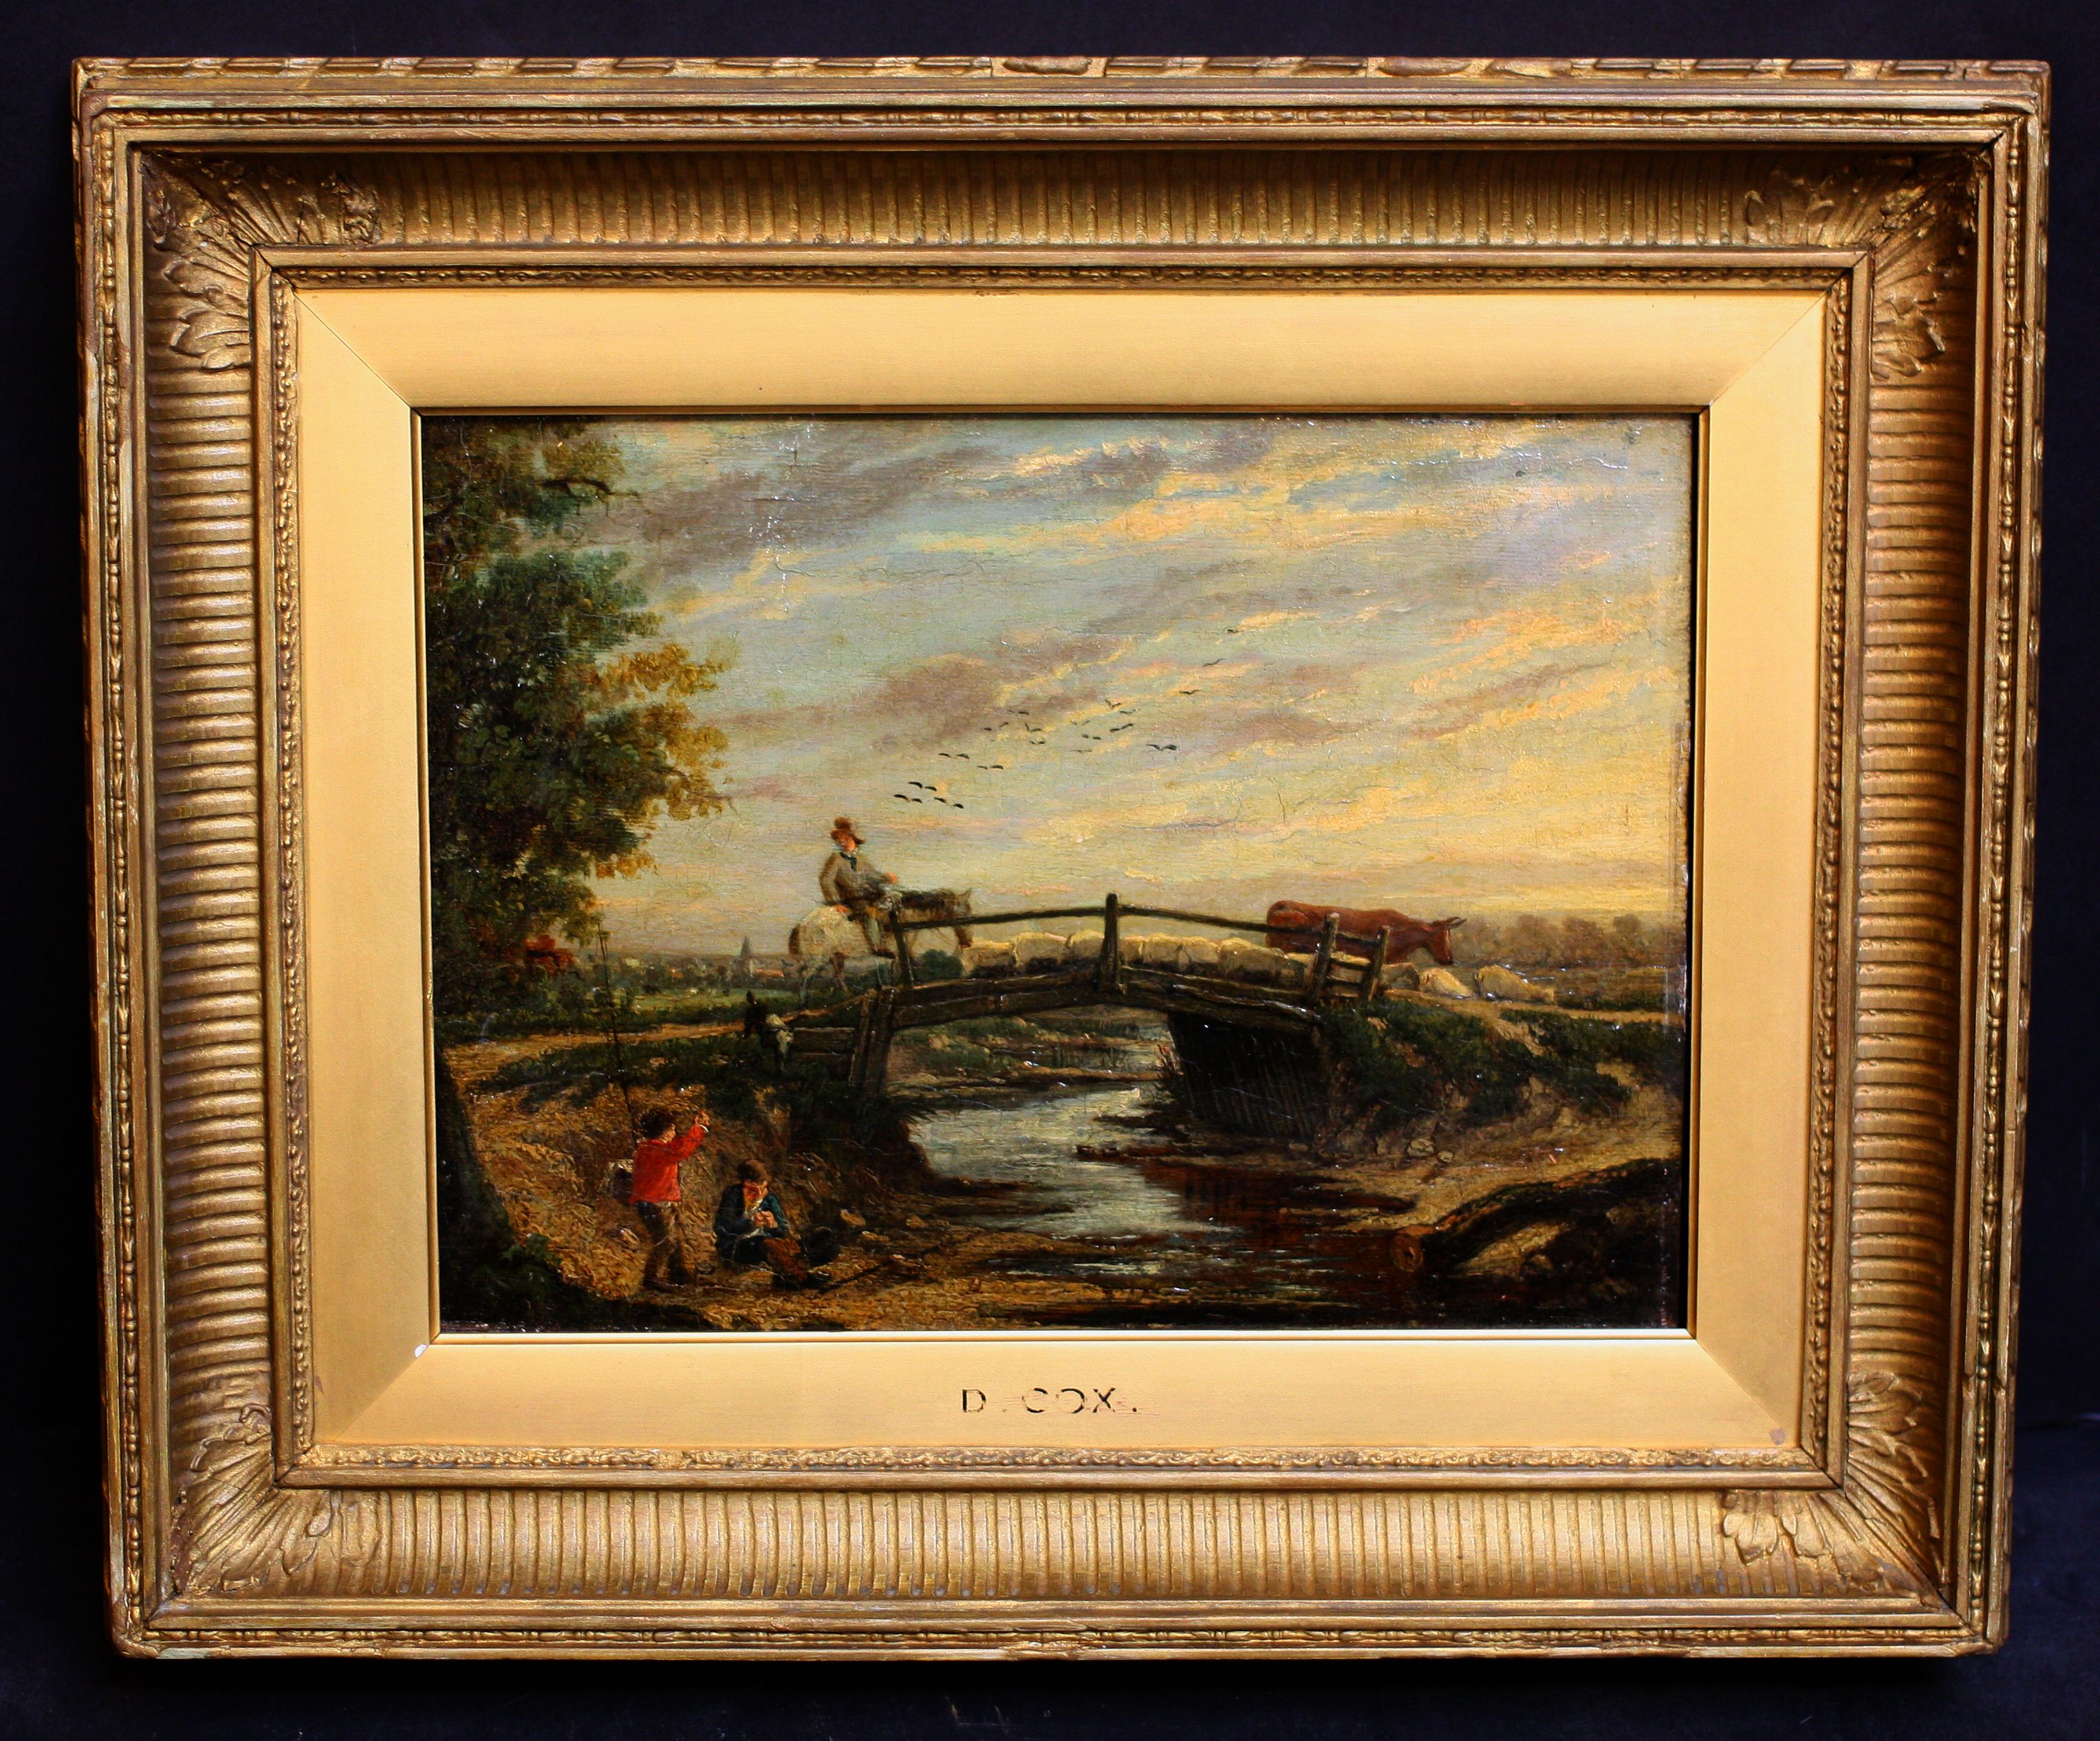 English Oil Painting of Boys Fishing by D. Cox